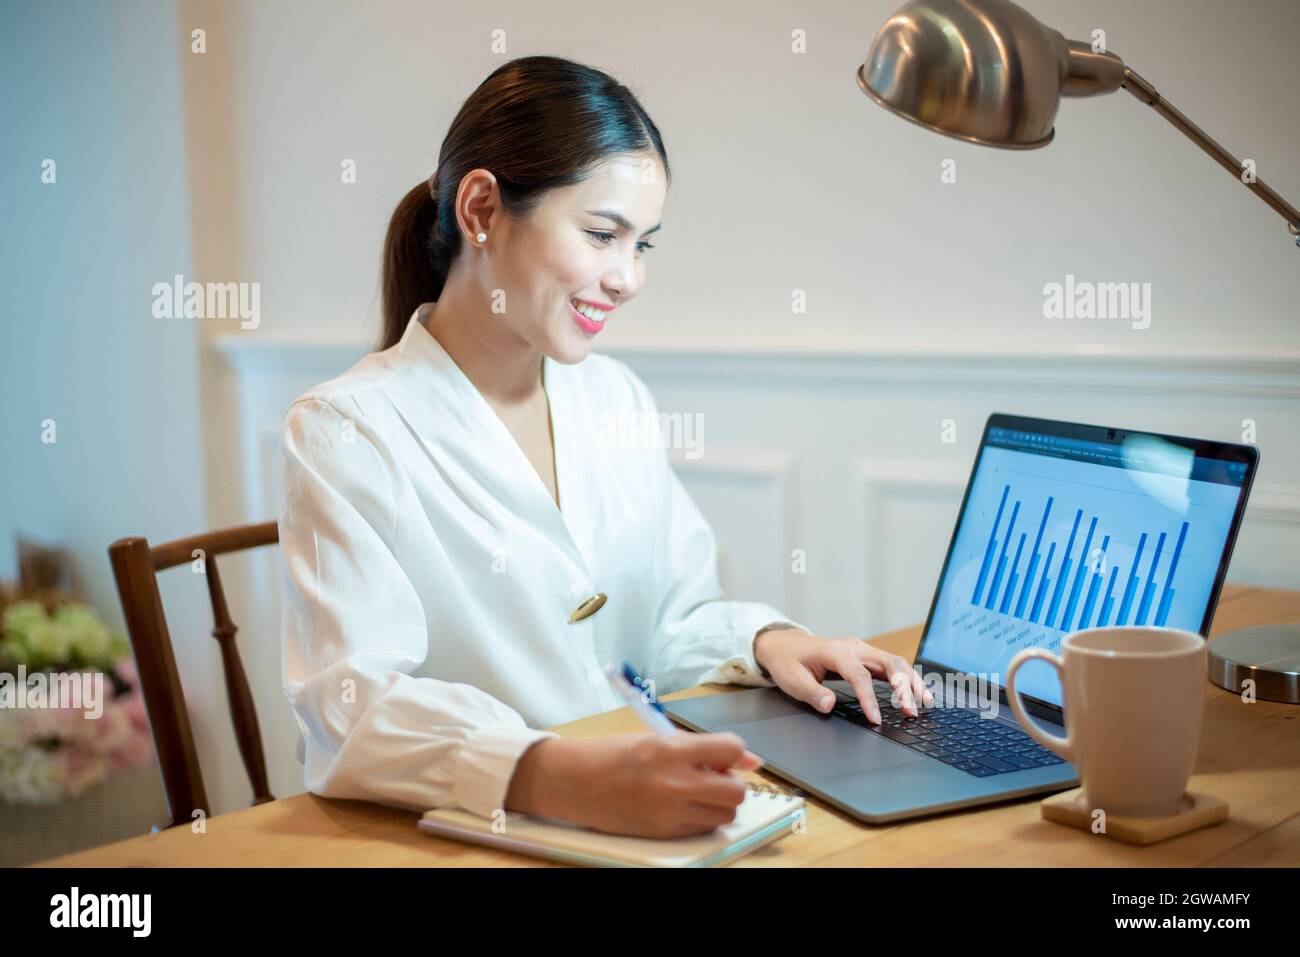 Smiling Woman Using Laptop While Sitting At Office Desk Stock Photo